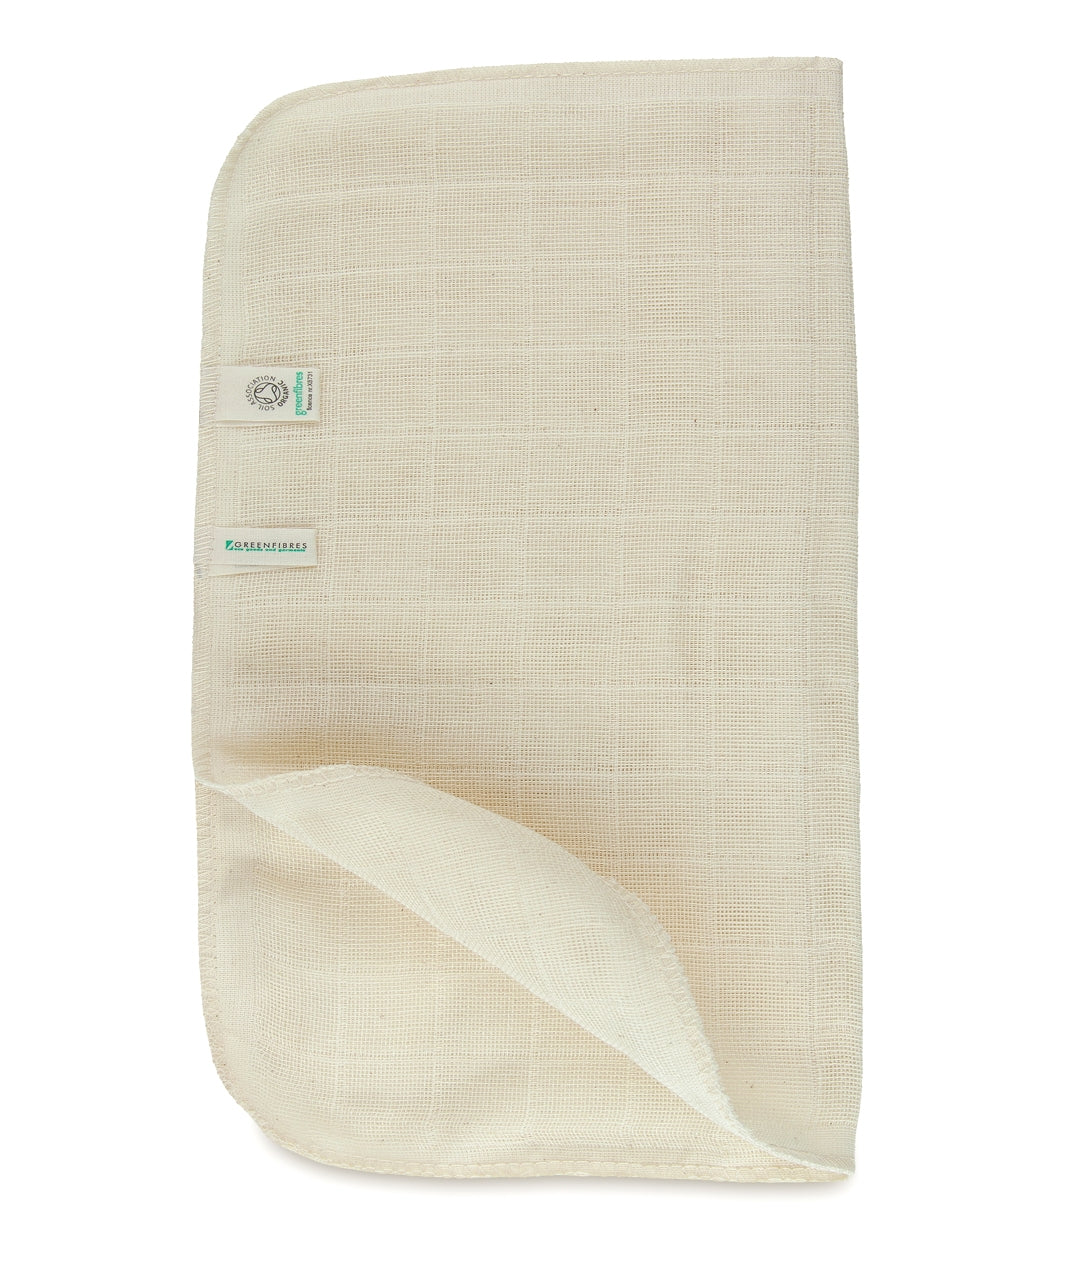 Organic Brushed Cotton &amp; Muslin Cloth (25cm x 25cm) | Greenfibres | Raw Living UK | House &amp; Home | Bath &amp; Shower | Beauty | Greenfibres Organic Brushed Cotton &amp; Muslin Cloth (25cm x 25cm): cotton muslin face cloth on one side &amp; soft, absorbent brushed organic cotton on the other.